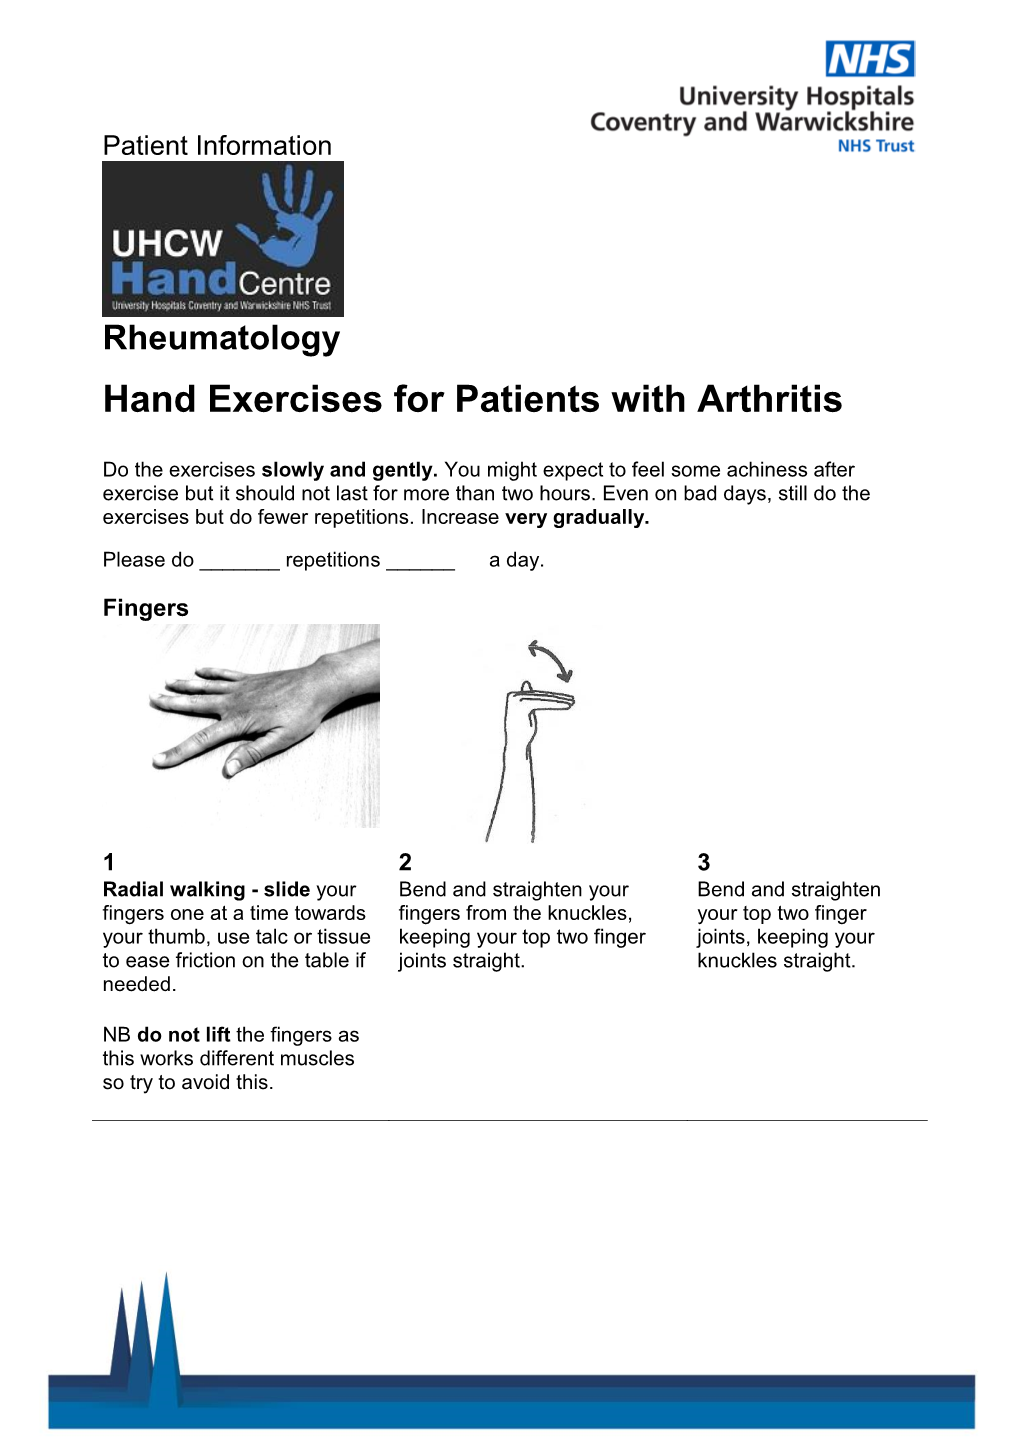 Hand Exercises for Patients with Arthritis